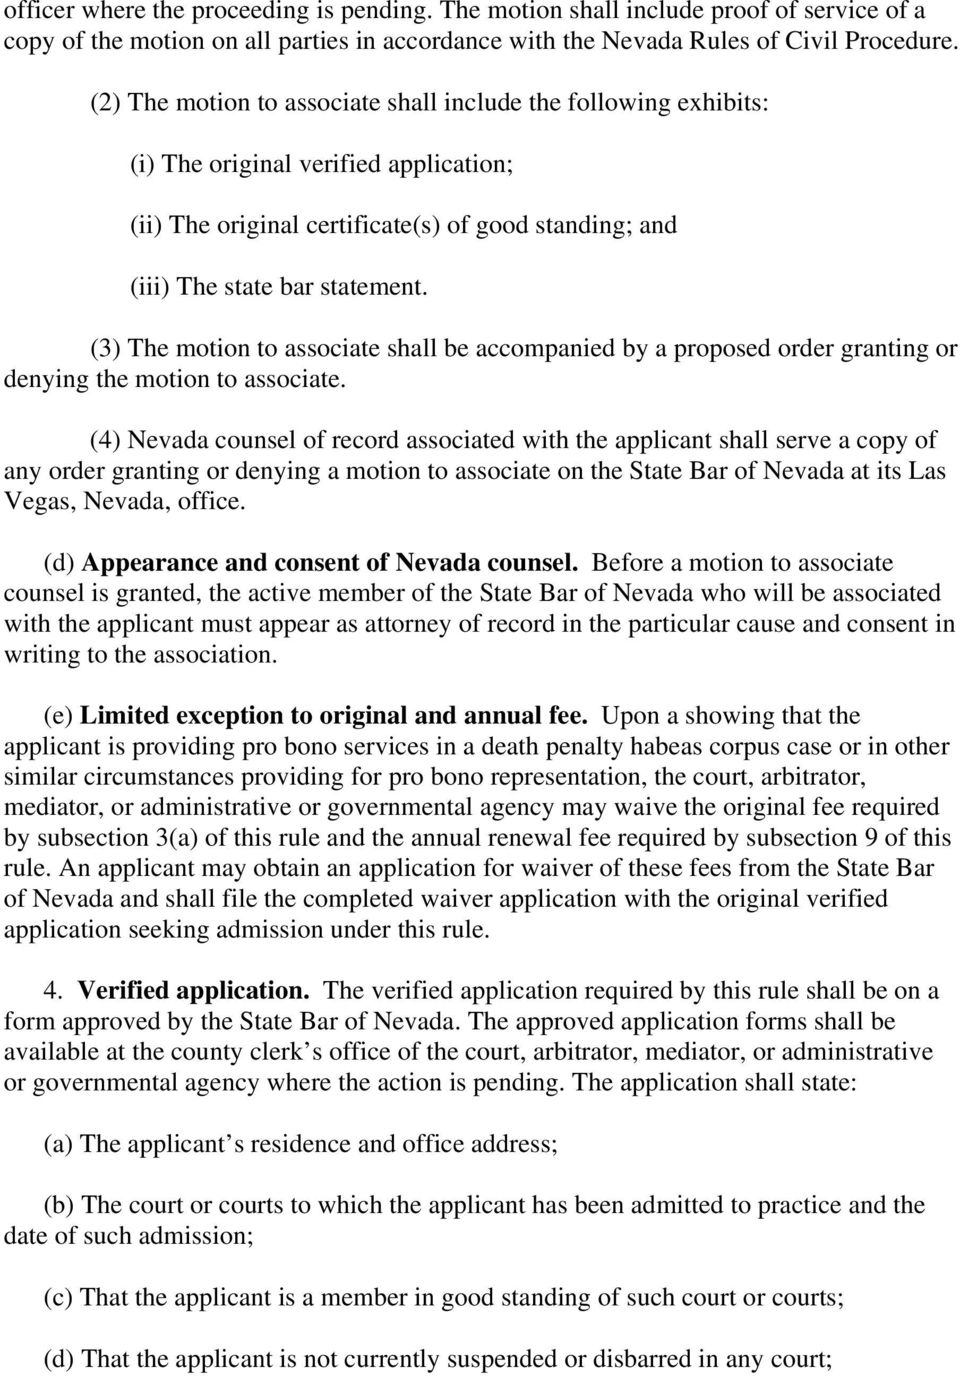 (3) The motion to associate shall be accompanied by a proposed order granting or denying the motion to associate.